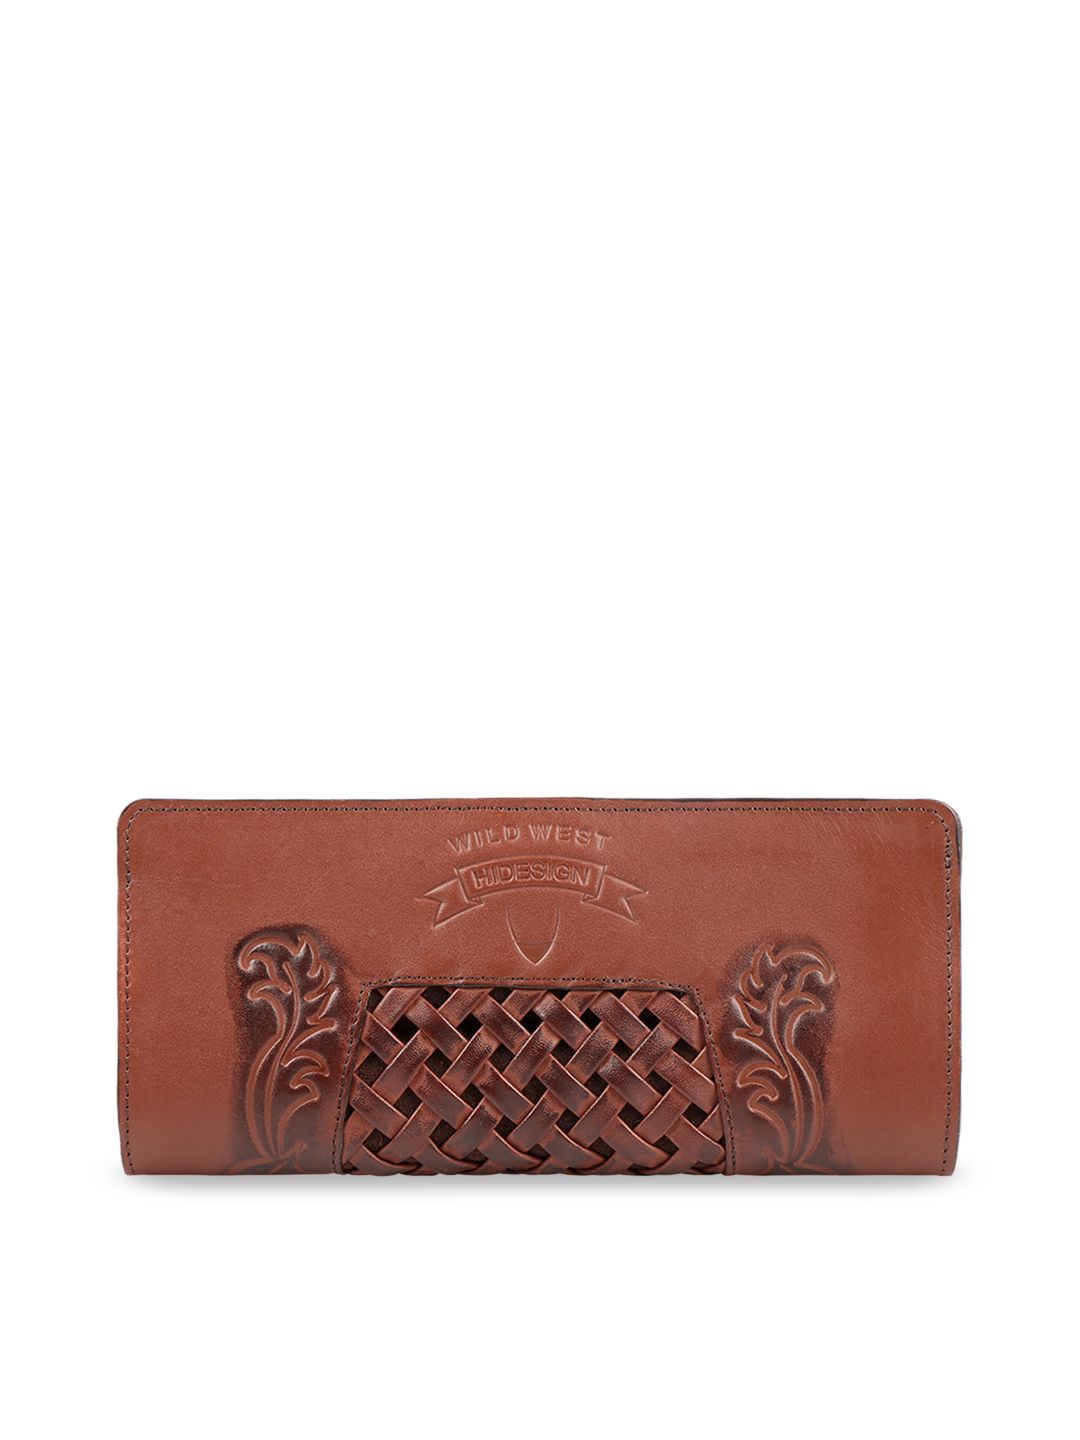 Hidesign Women Brown Textured Leather Two Fold Wallet Price in India